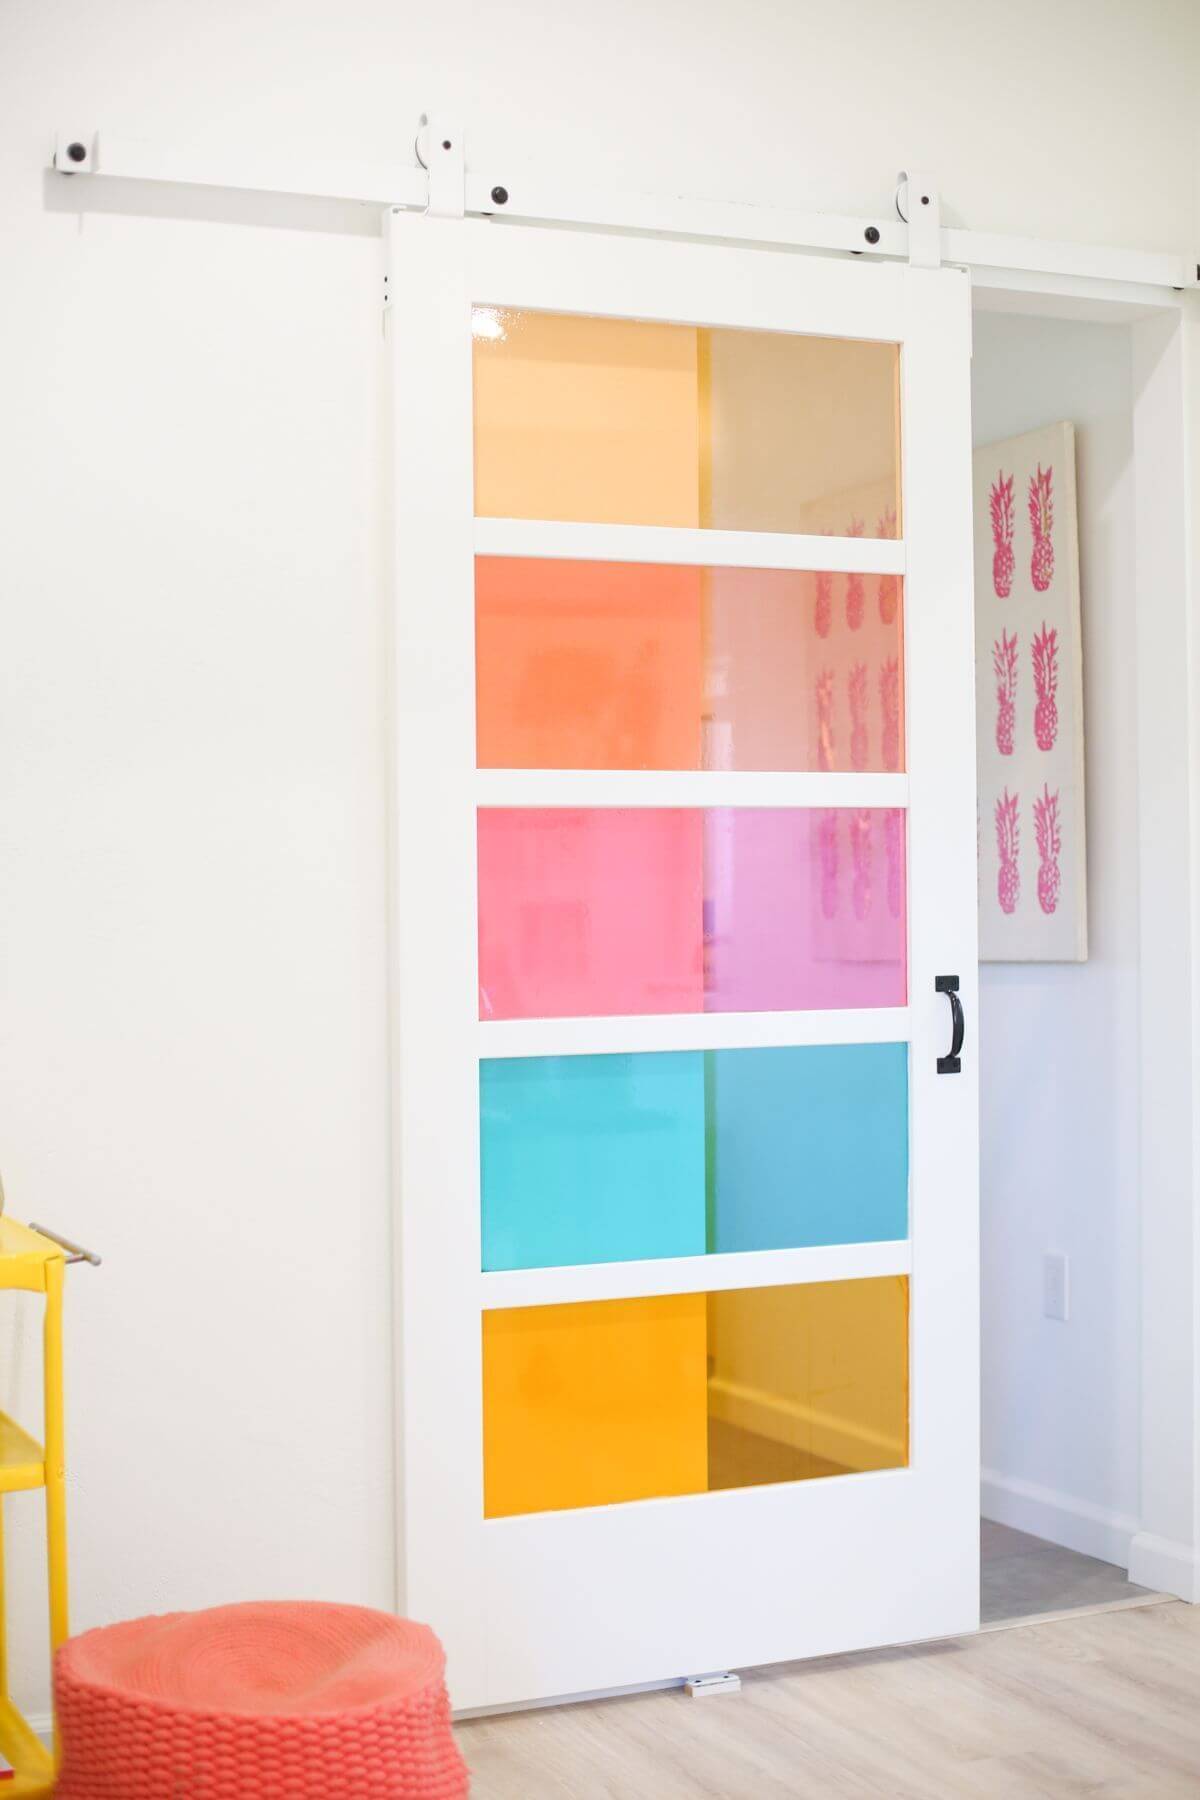 11- Color doesn't just come in paint on house doors